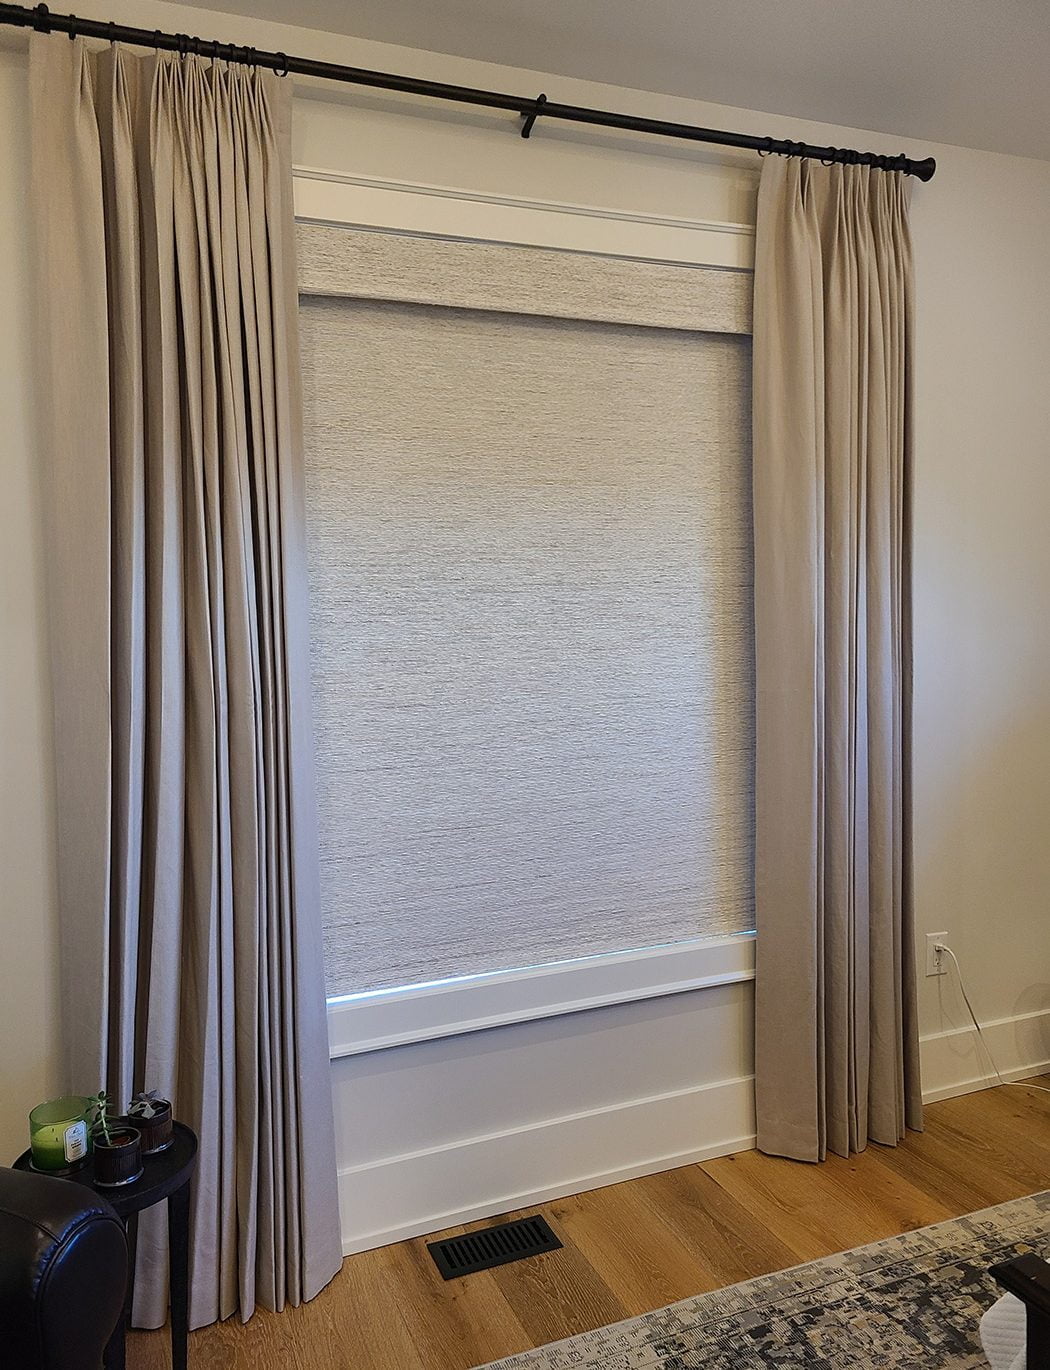 Drapery With Blinds On Window Aspect Ratio 460 600